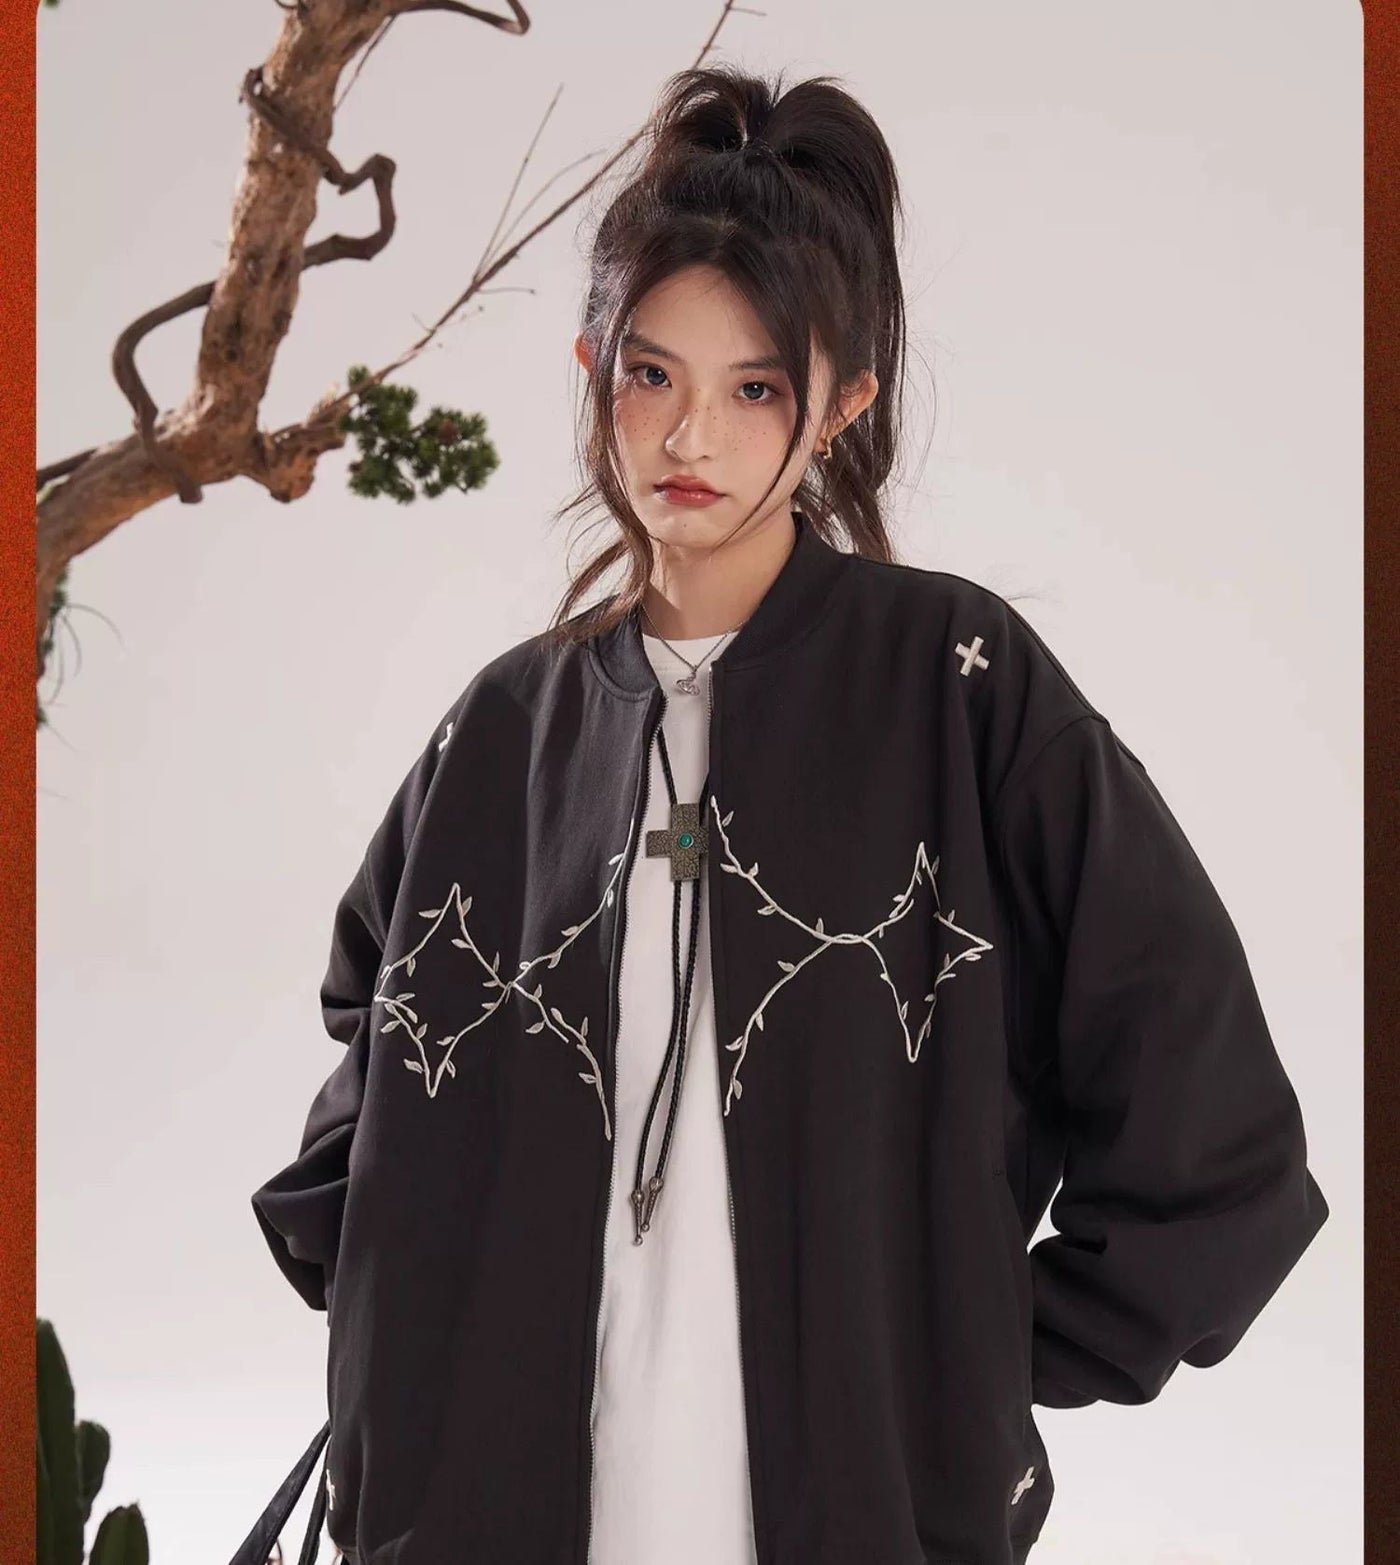 Stitched Stems and Leaves Jacket Korean Street Fashion Jacket By New Start Shop Online at OH Vault